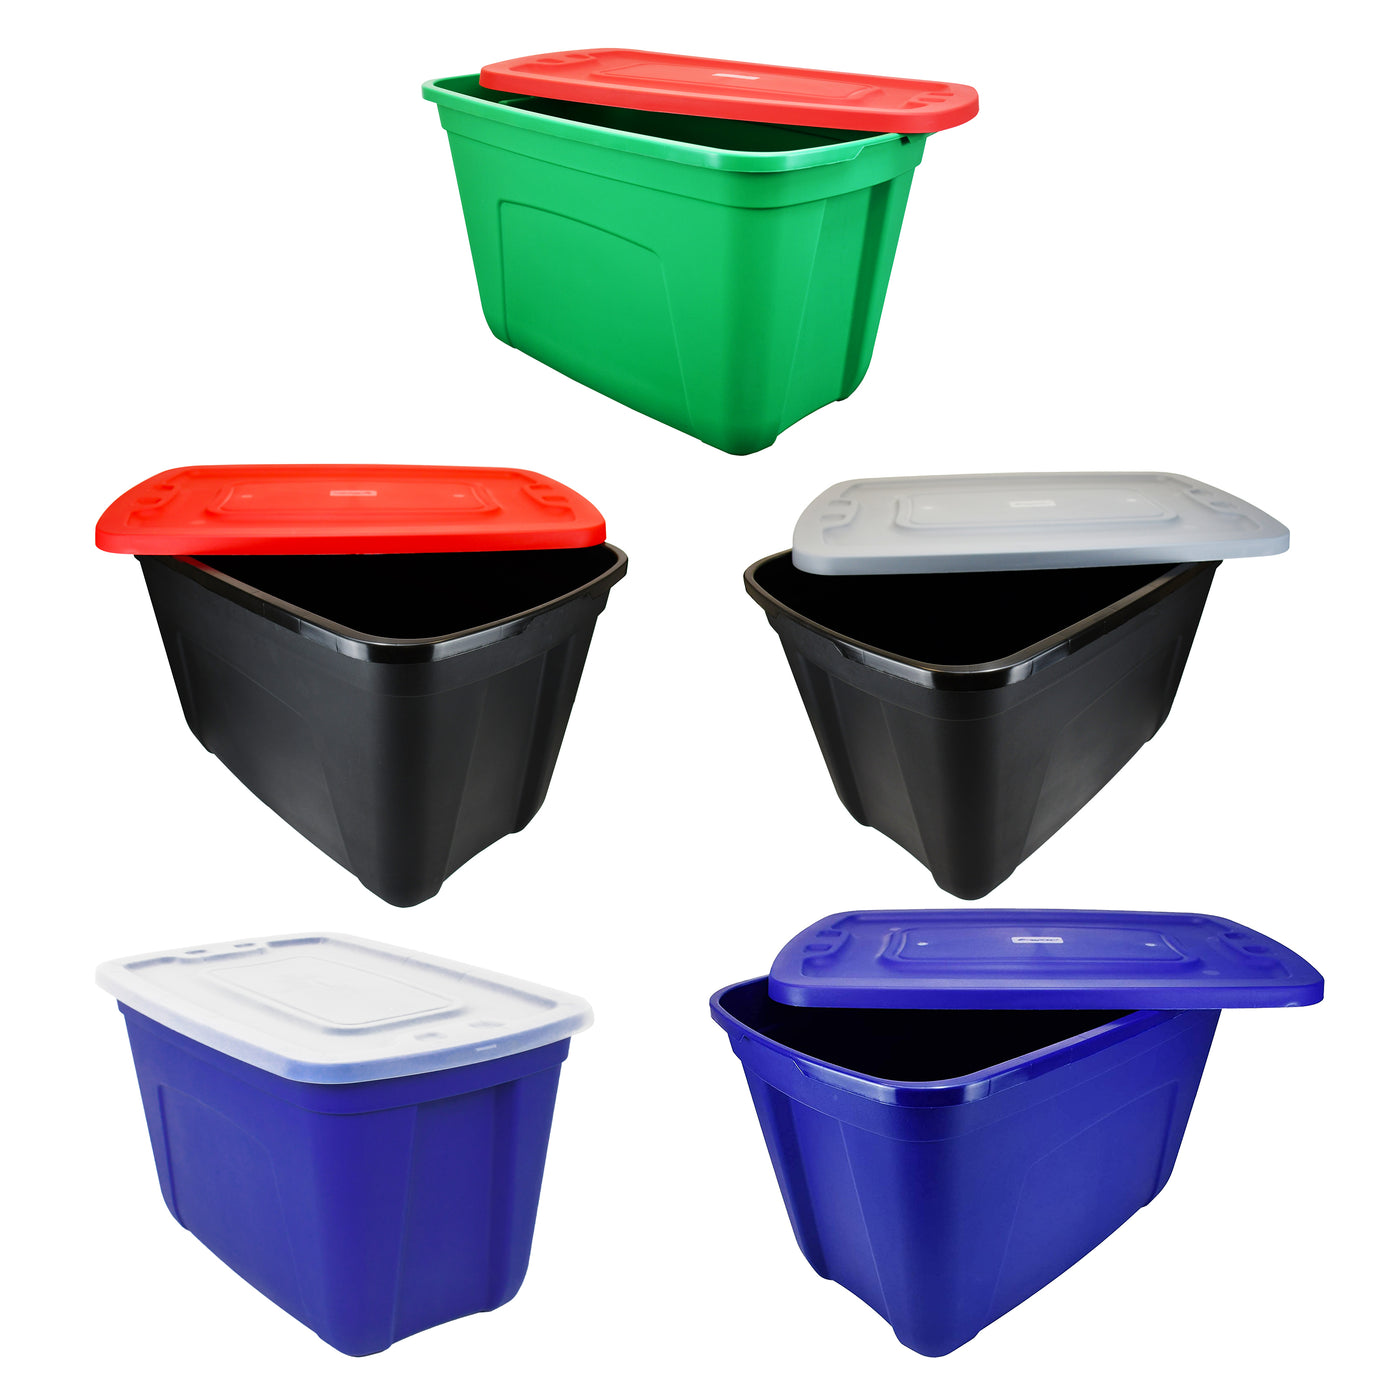 SimplyKleen Large Storage Bins with Lids, 18-Gallon (72-Quart), 4-pack